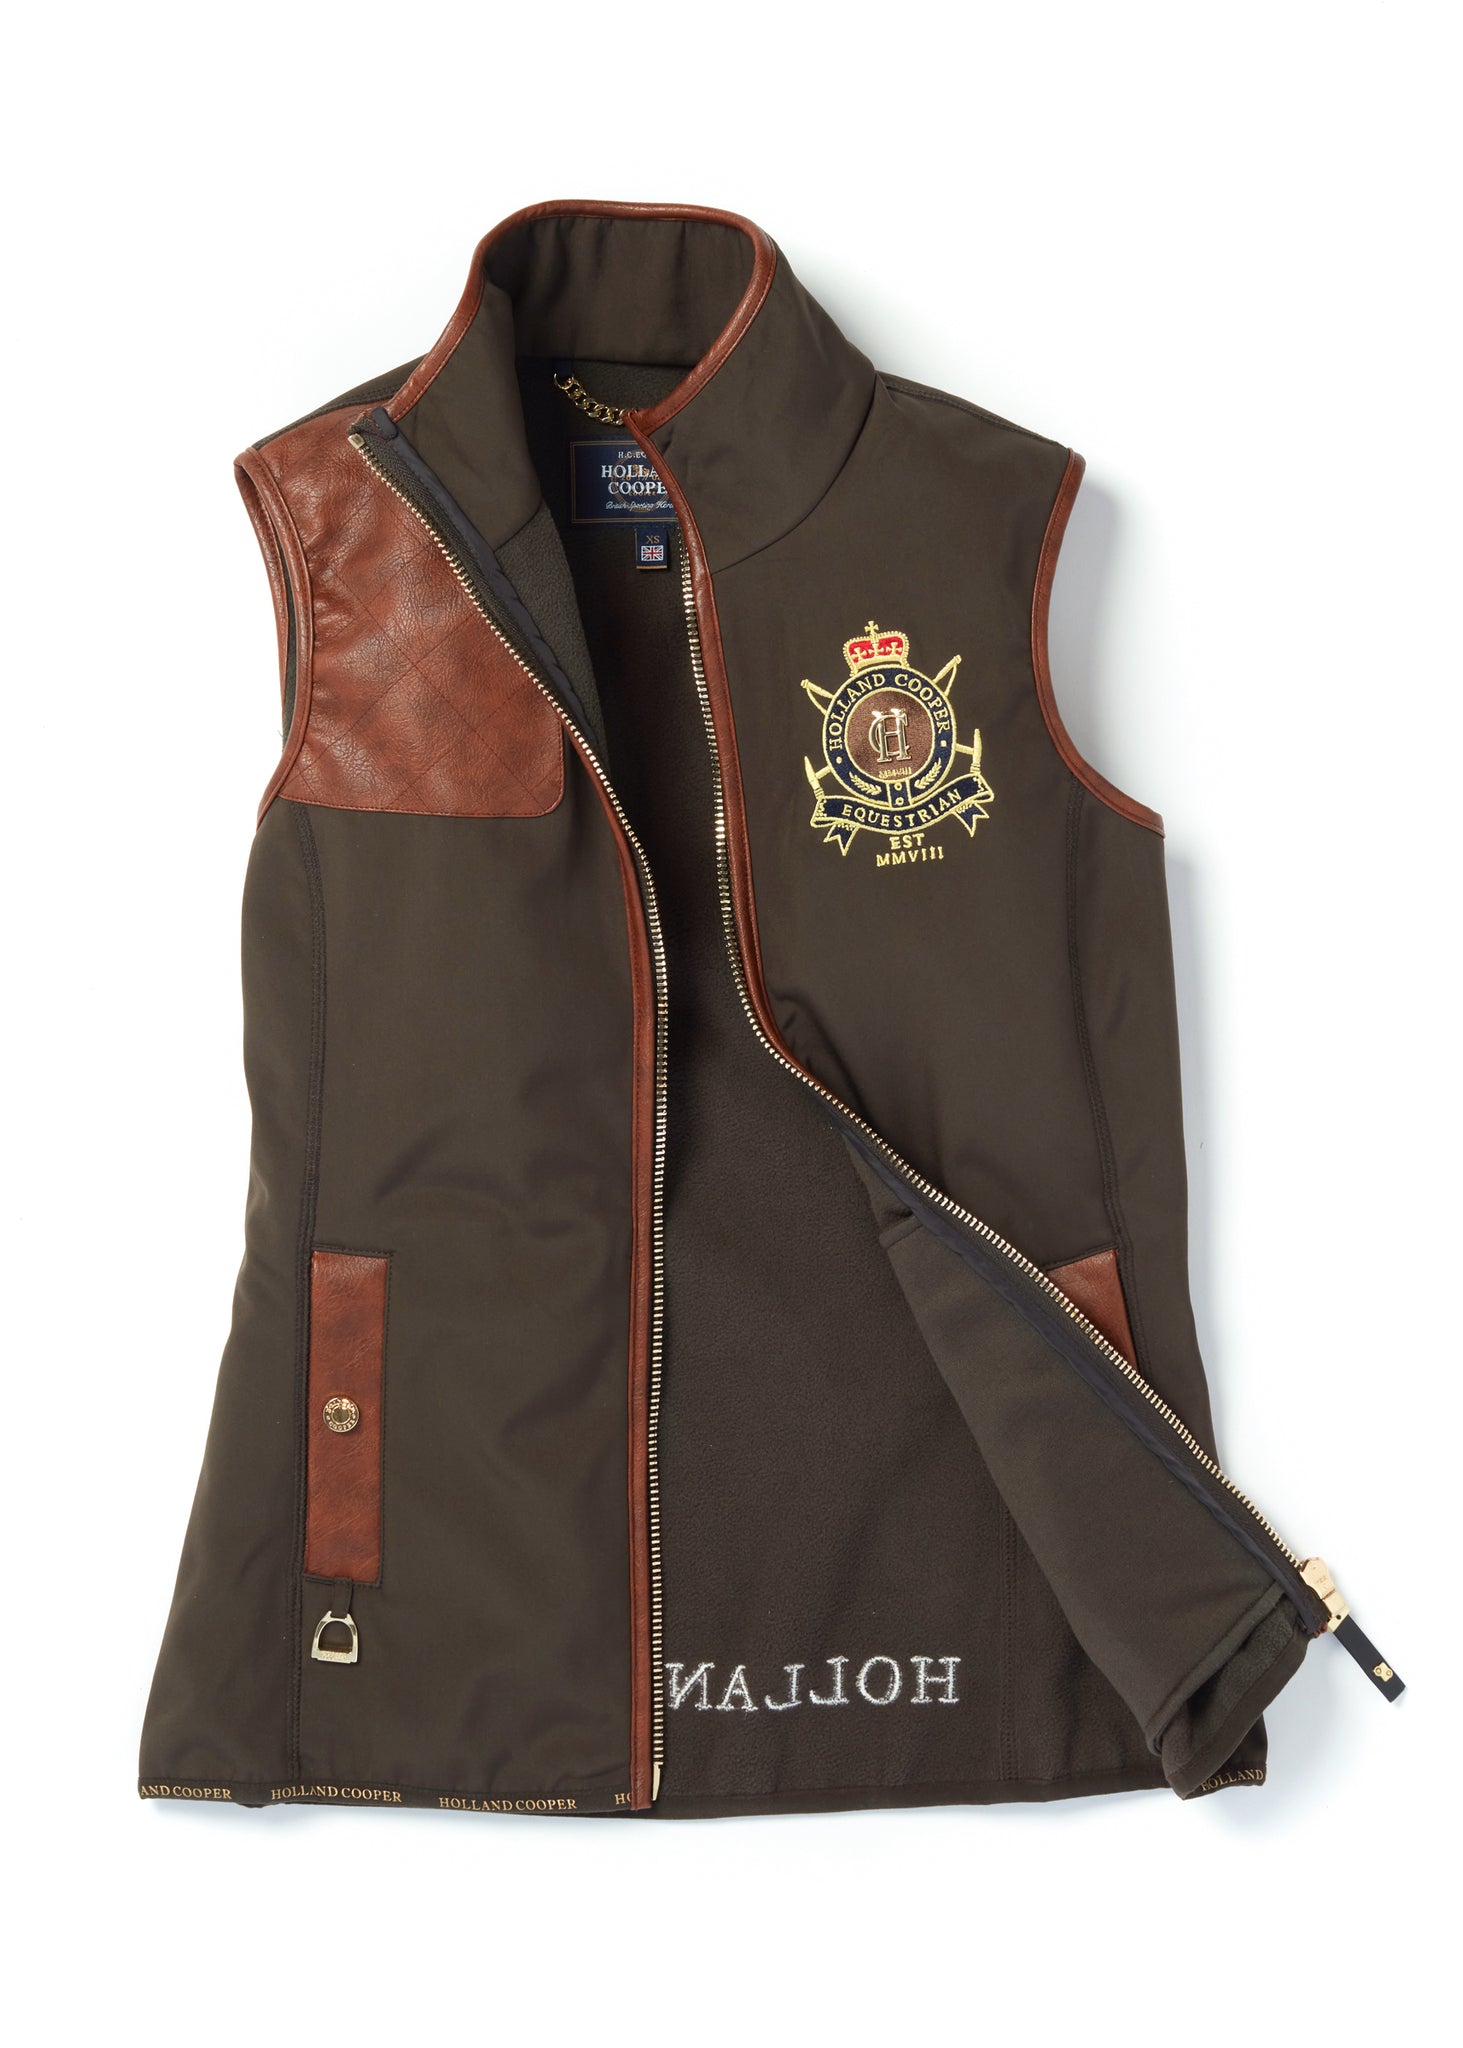 womens khaki gilet with dark brown leather seams along the arm holes pockets and down the zip with a gun patch on the shoulder and an embroidered logo